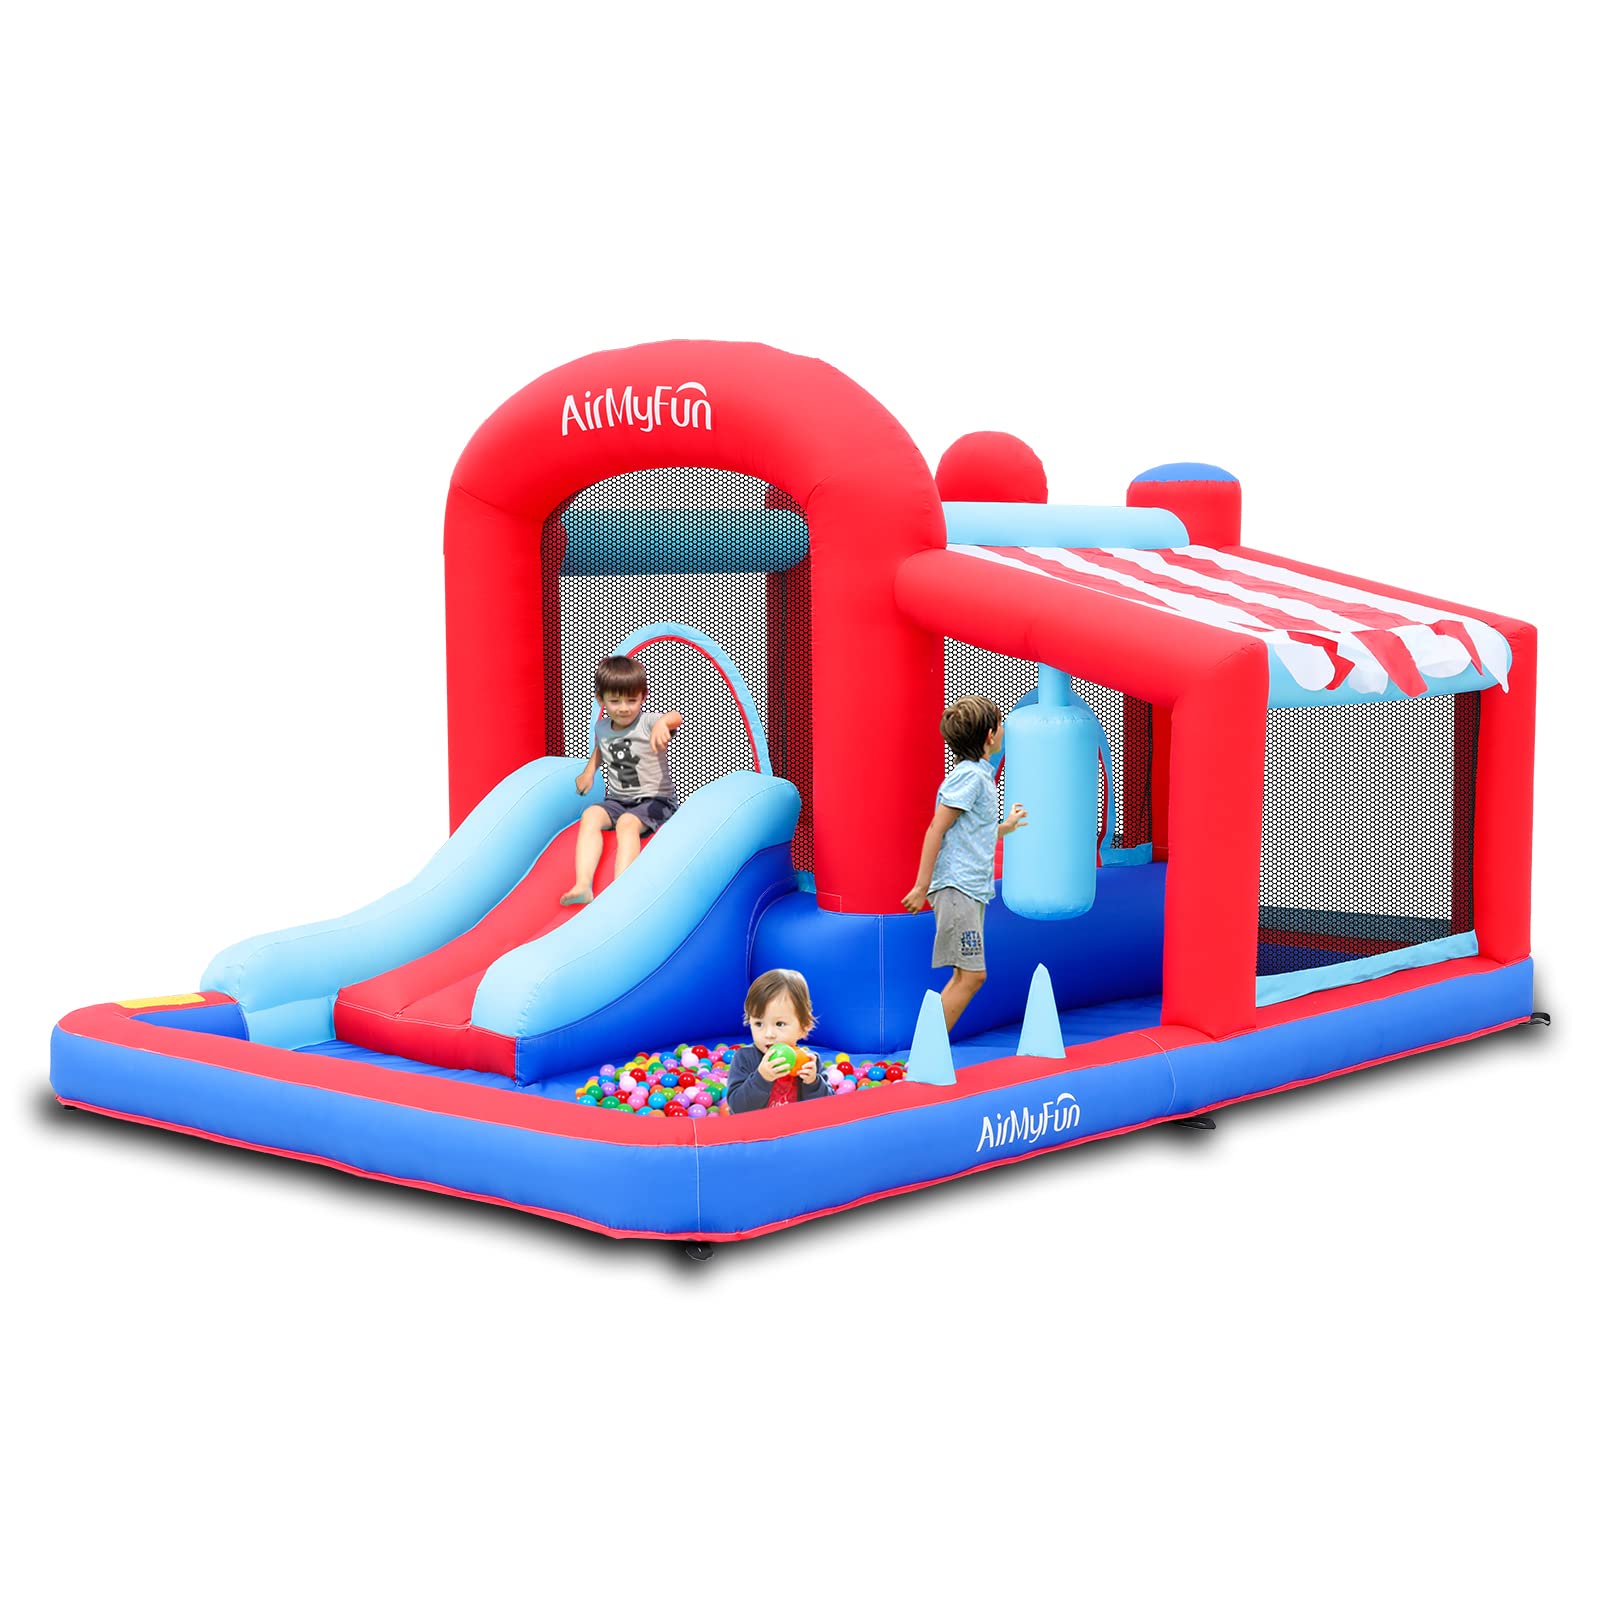 Looking For Family Fun in Zimtown This Fall. Check Out These Top 10 Inflatable Bounce Houses